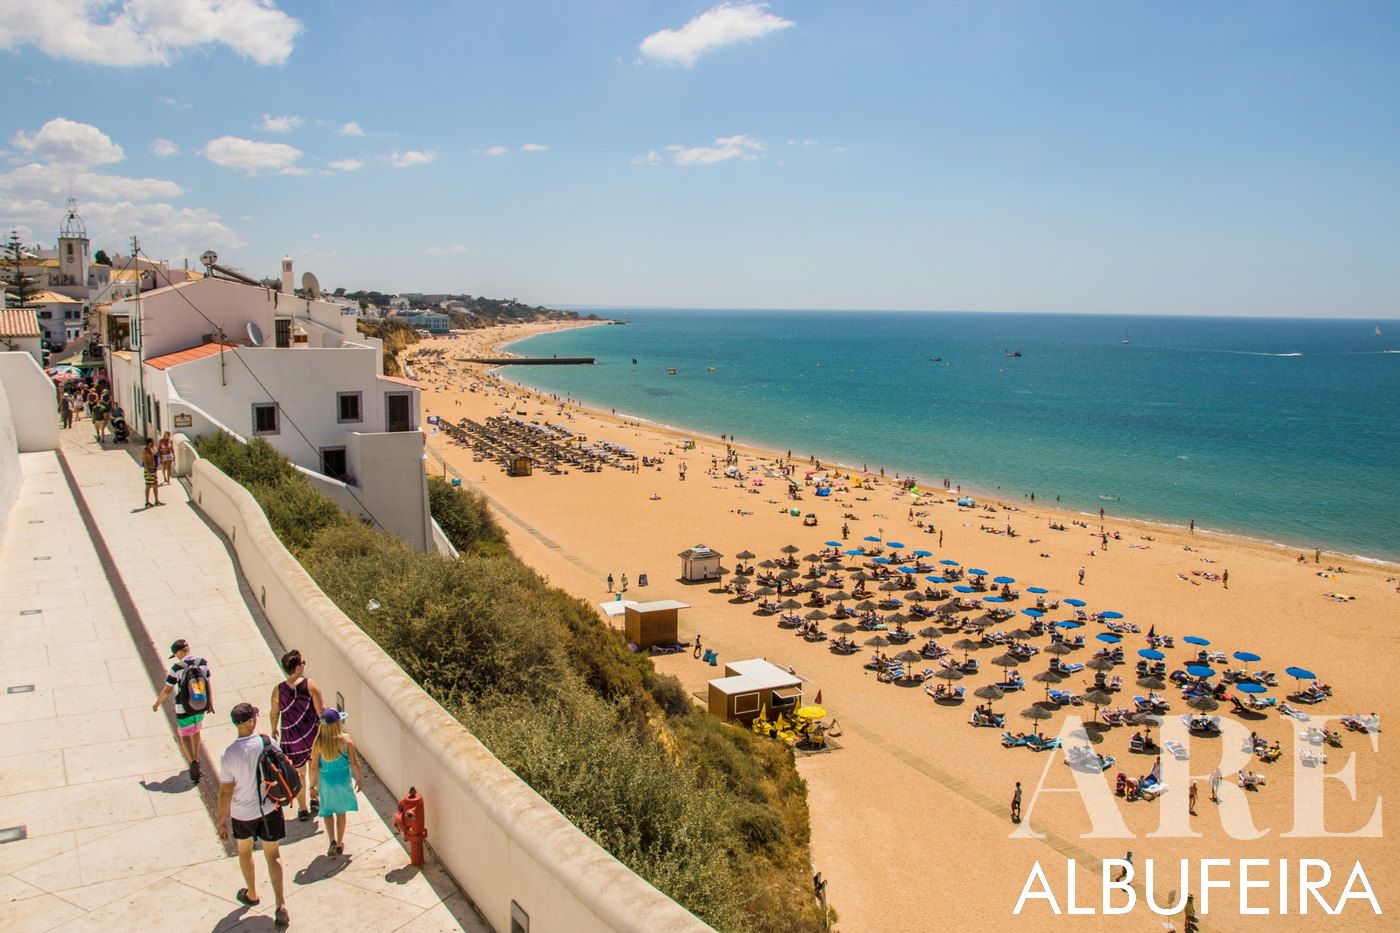 Eastern view of Albufeira's beach and the old town. On the left, a family strolls on the elevated pathway leading to the old town, with quaint cliffside houses beneath. Below, the sandy beach is speckled with umbrellas, bordered by the greenish hues of the ocean, all under a clear, blue sky